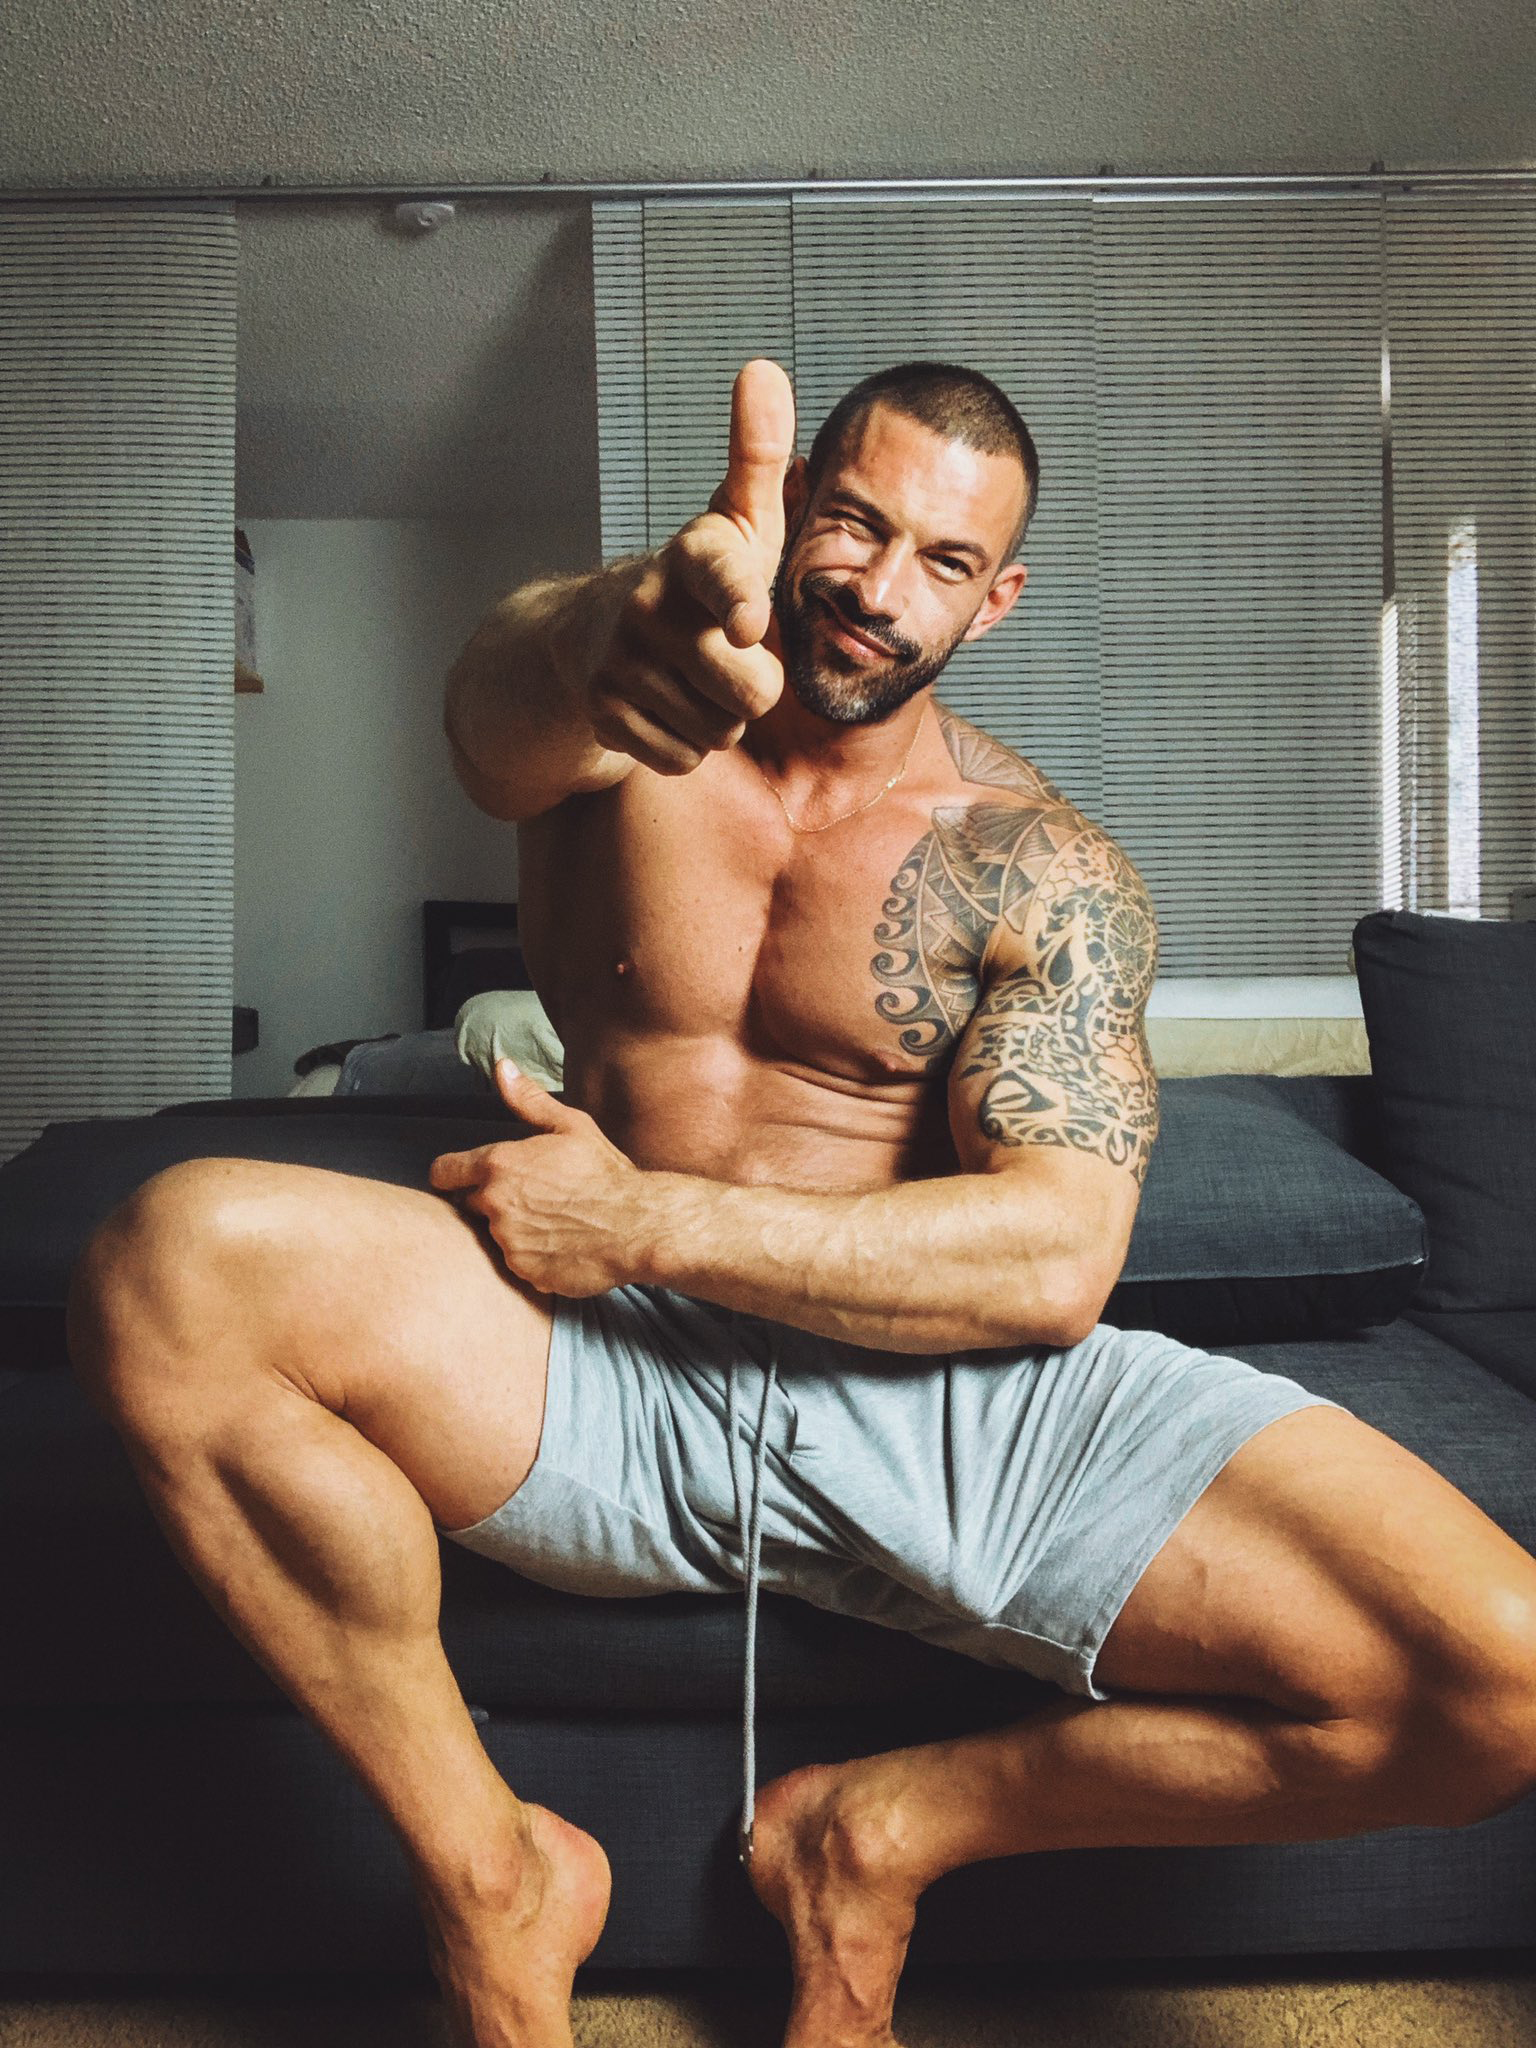 OMG, he’s naked: Insta-thotty and fitness model Garic Soldatov.